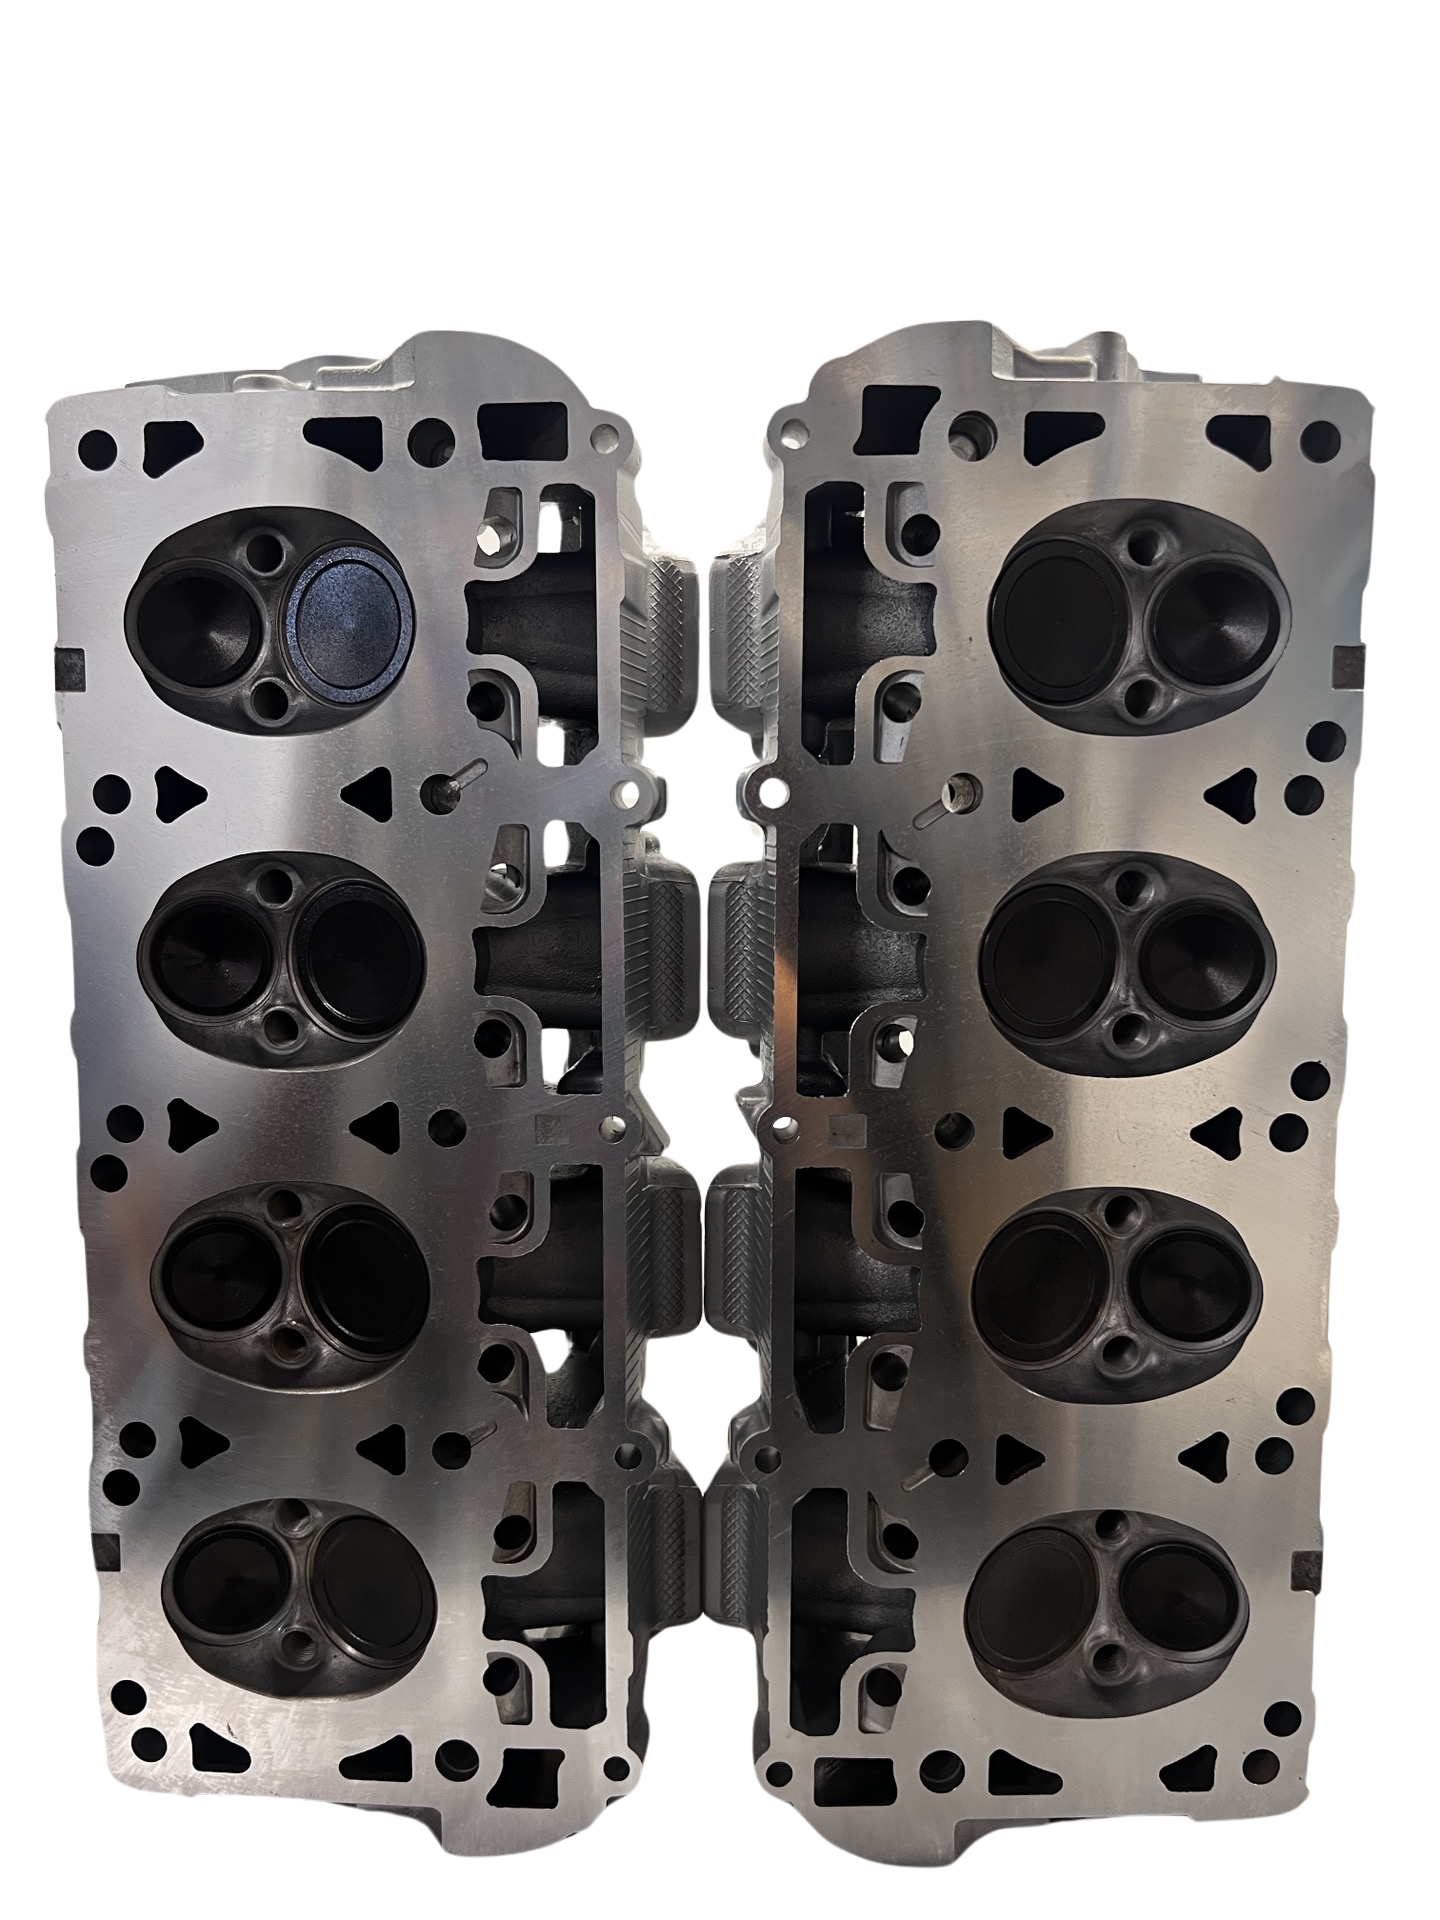 Bottom of the cylinder heads Chrysler / DODGE Hemi 5.7L Casting #1616DF (SOLD IN PAIR)